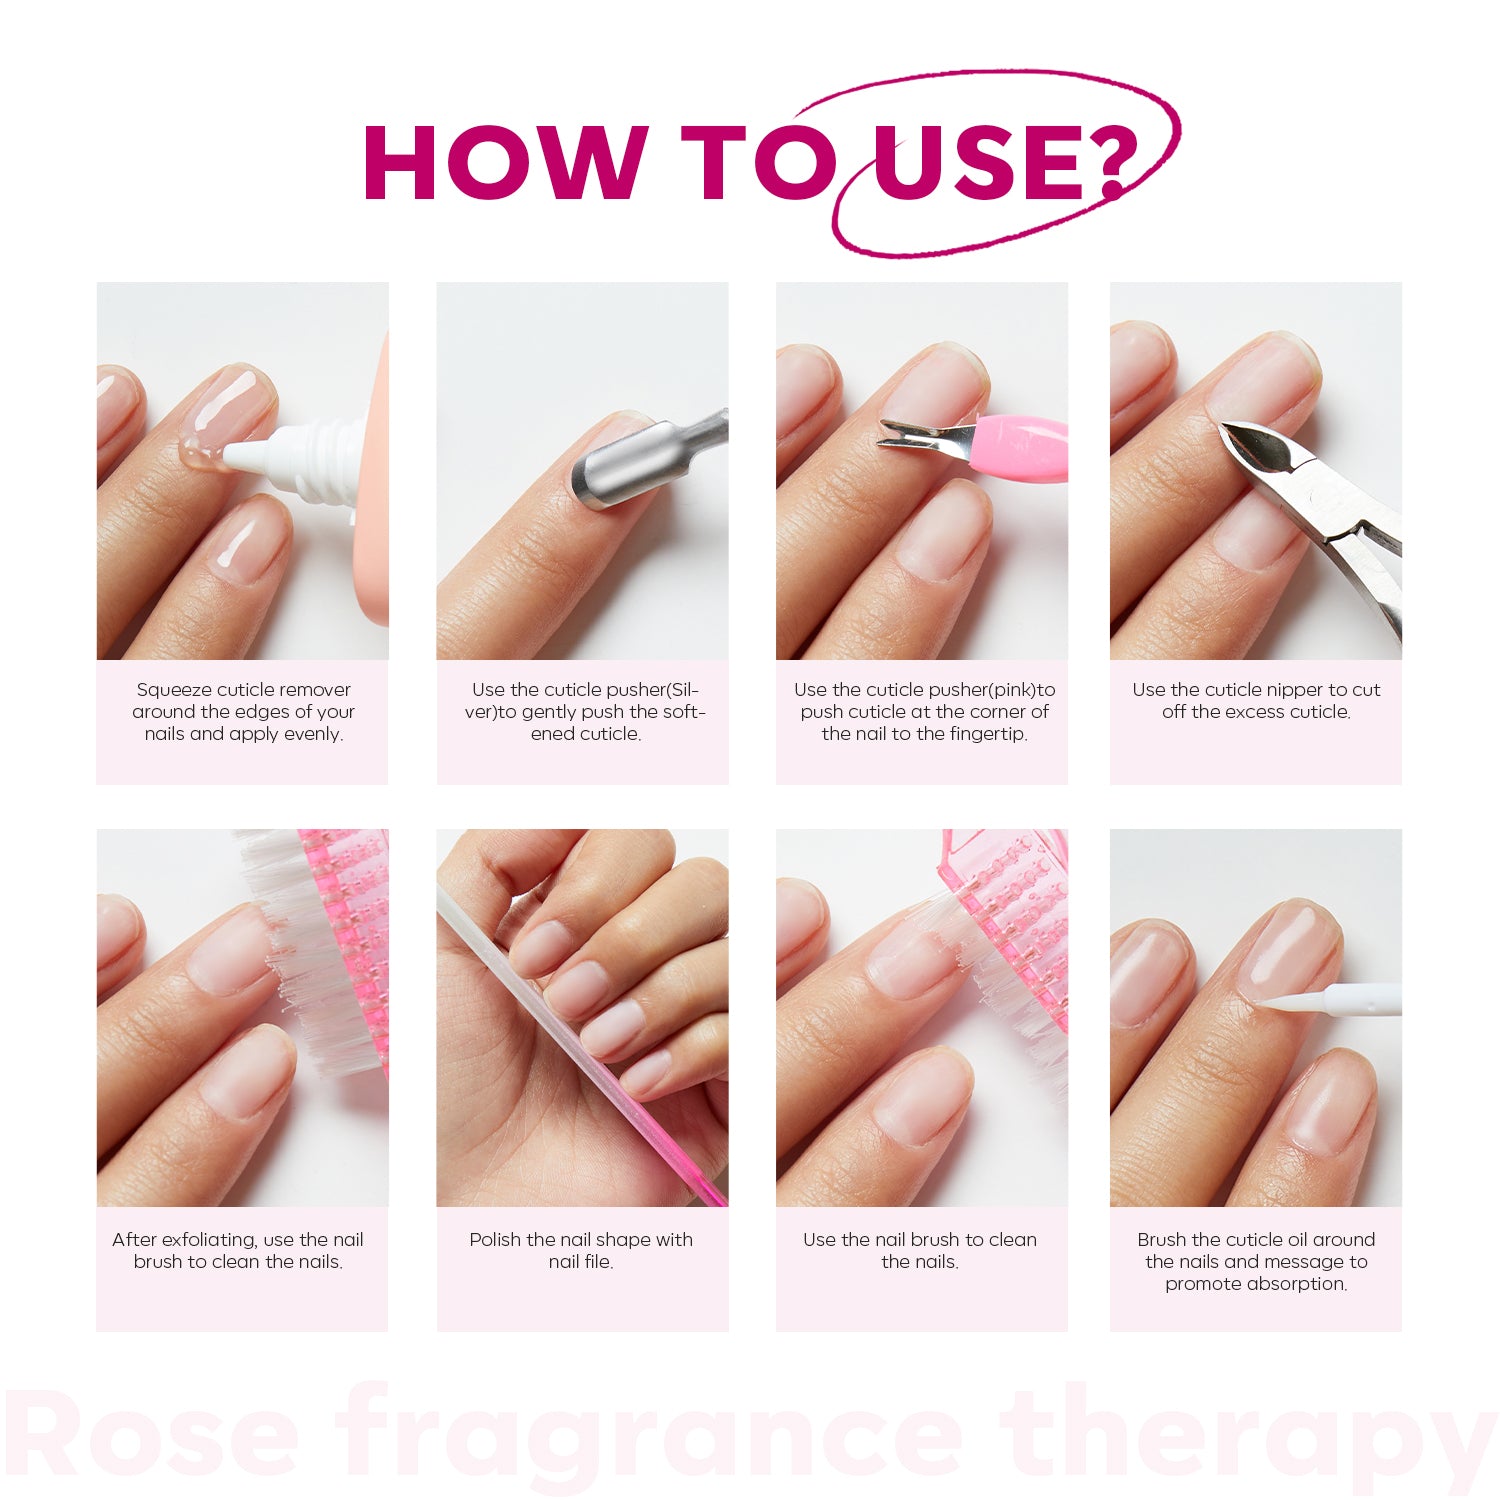 All-in-one Cuticle Remover Kit for Nail Care【US ONLY】